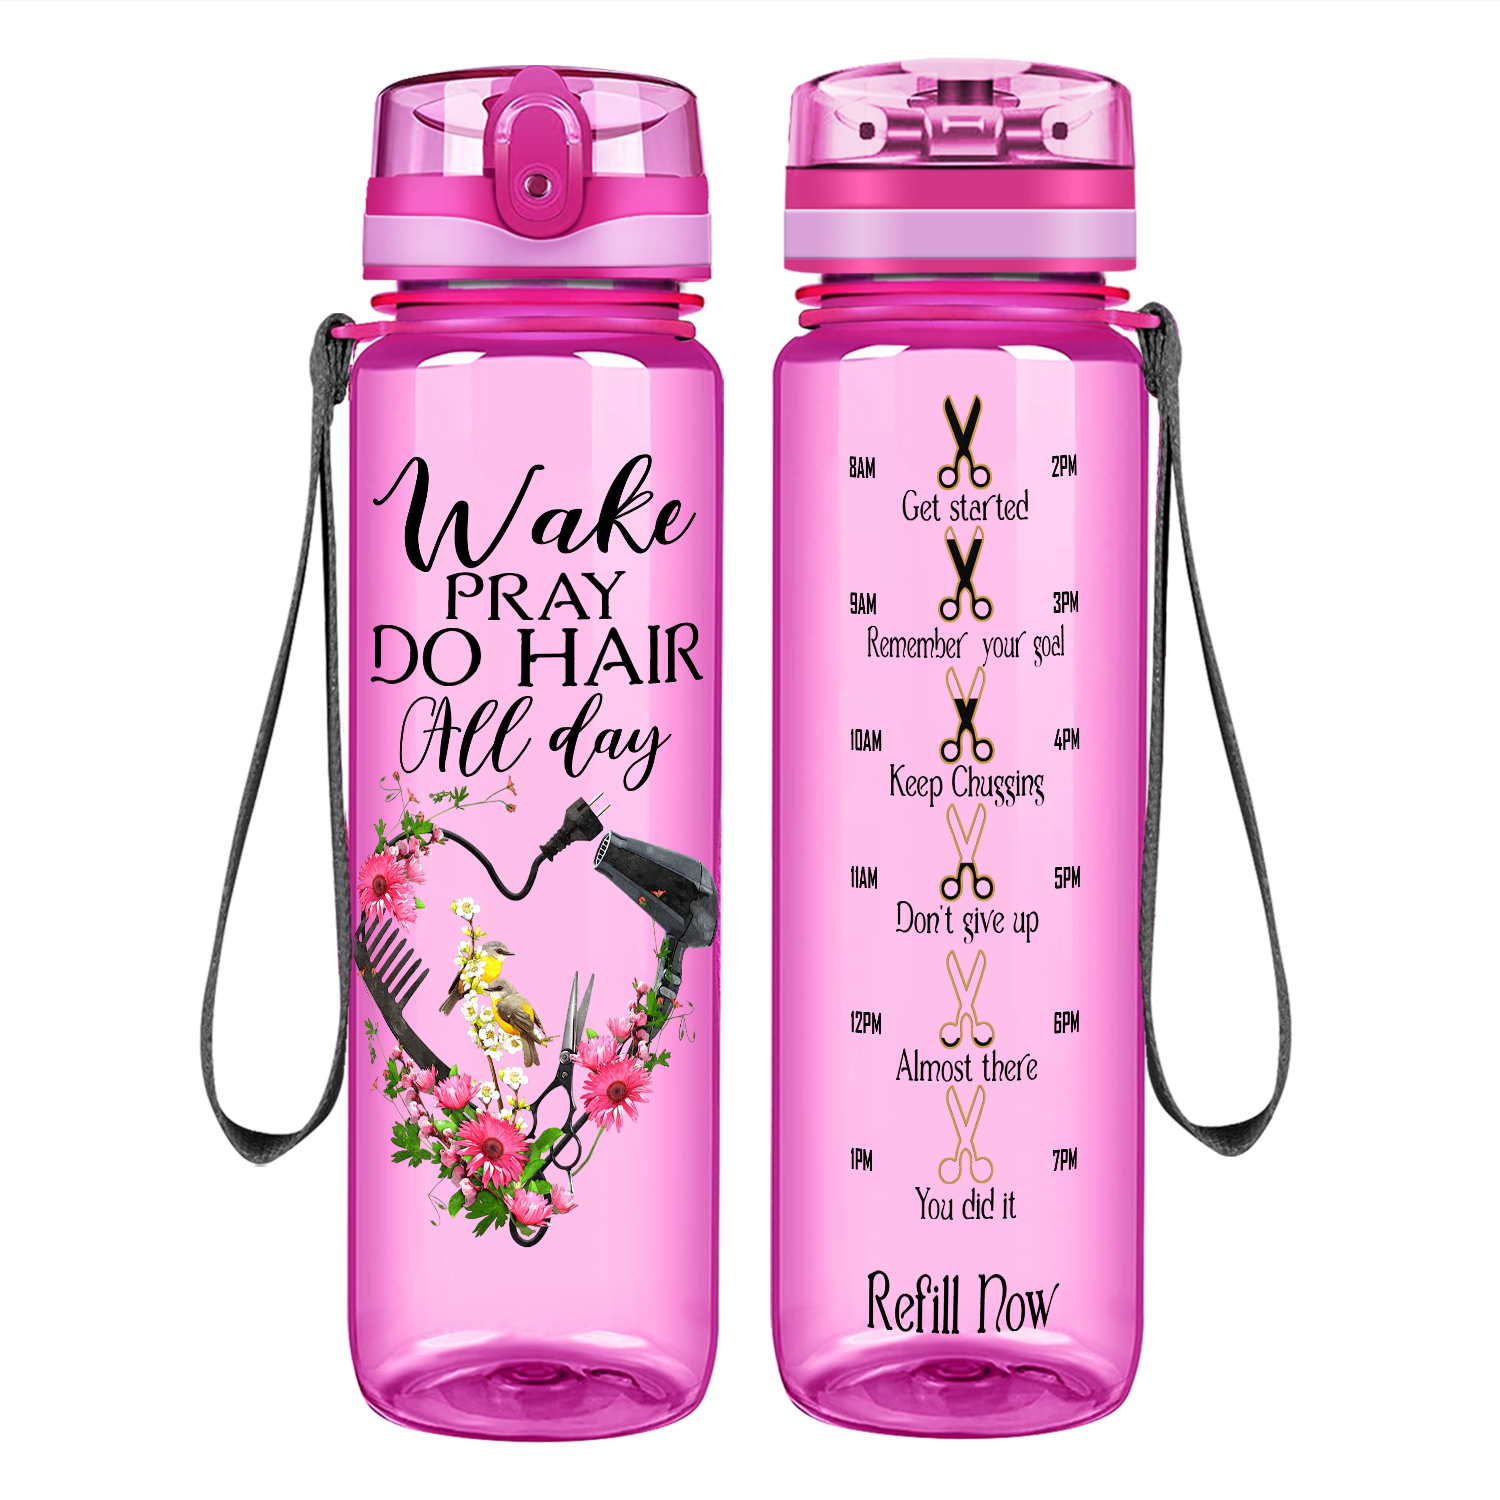 Wake Pray Do Hair All Day on 32 oz Motivational Tracking Water Bottle